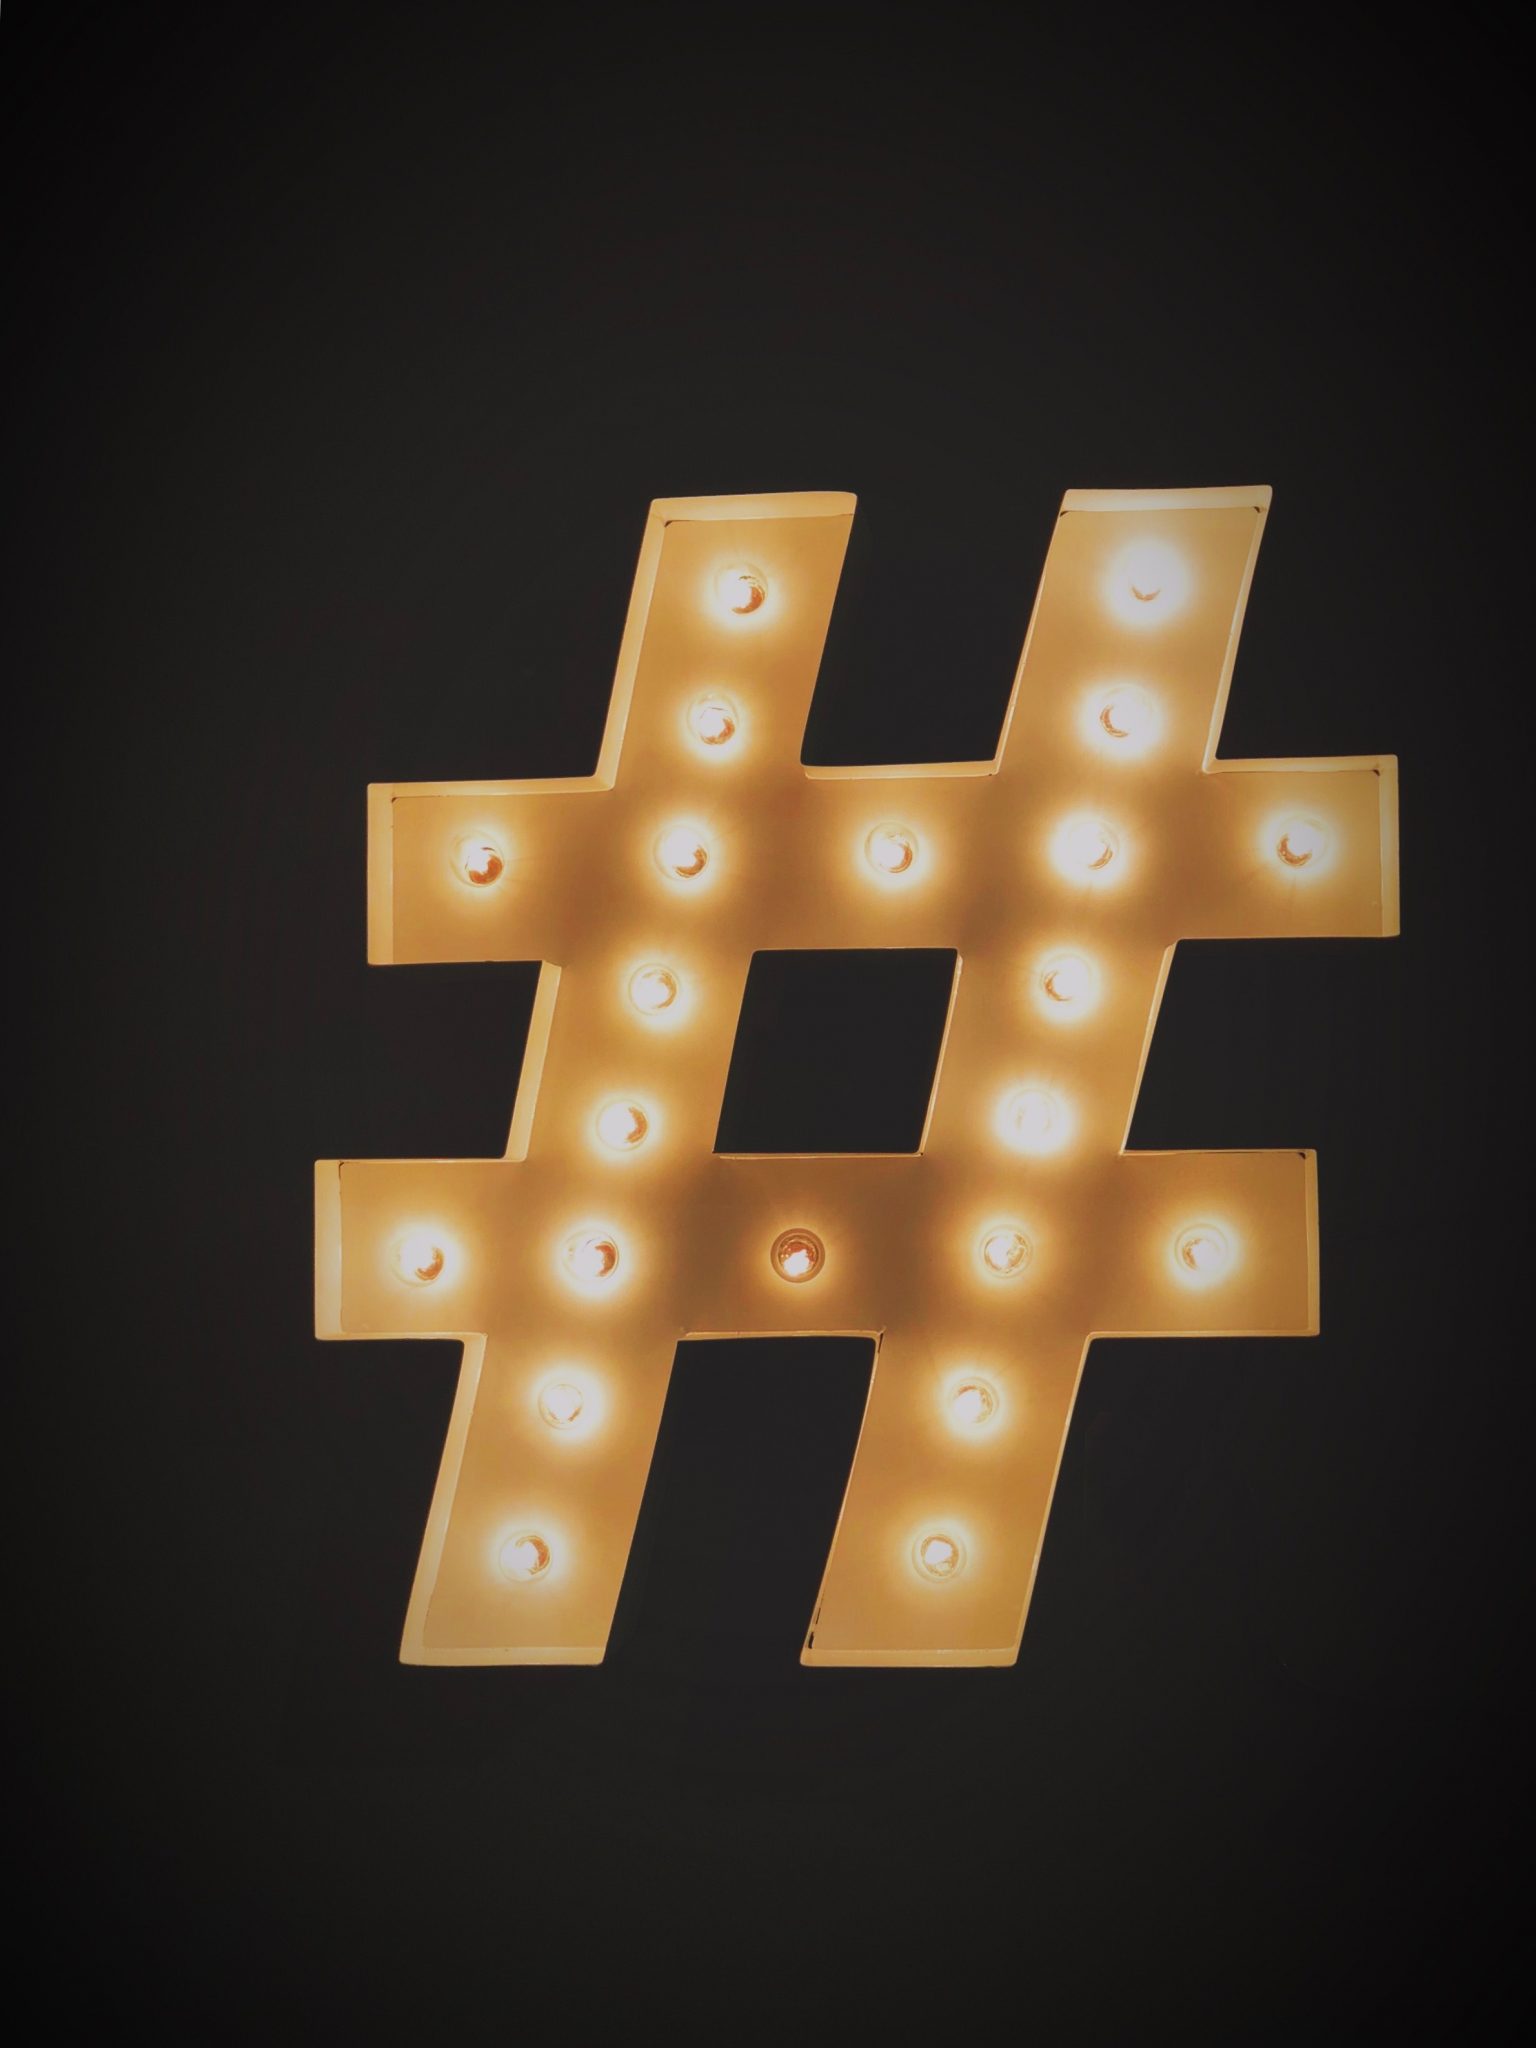 How can hashtags help to boost business success?